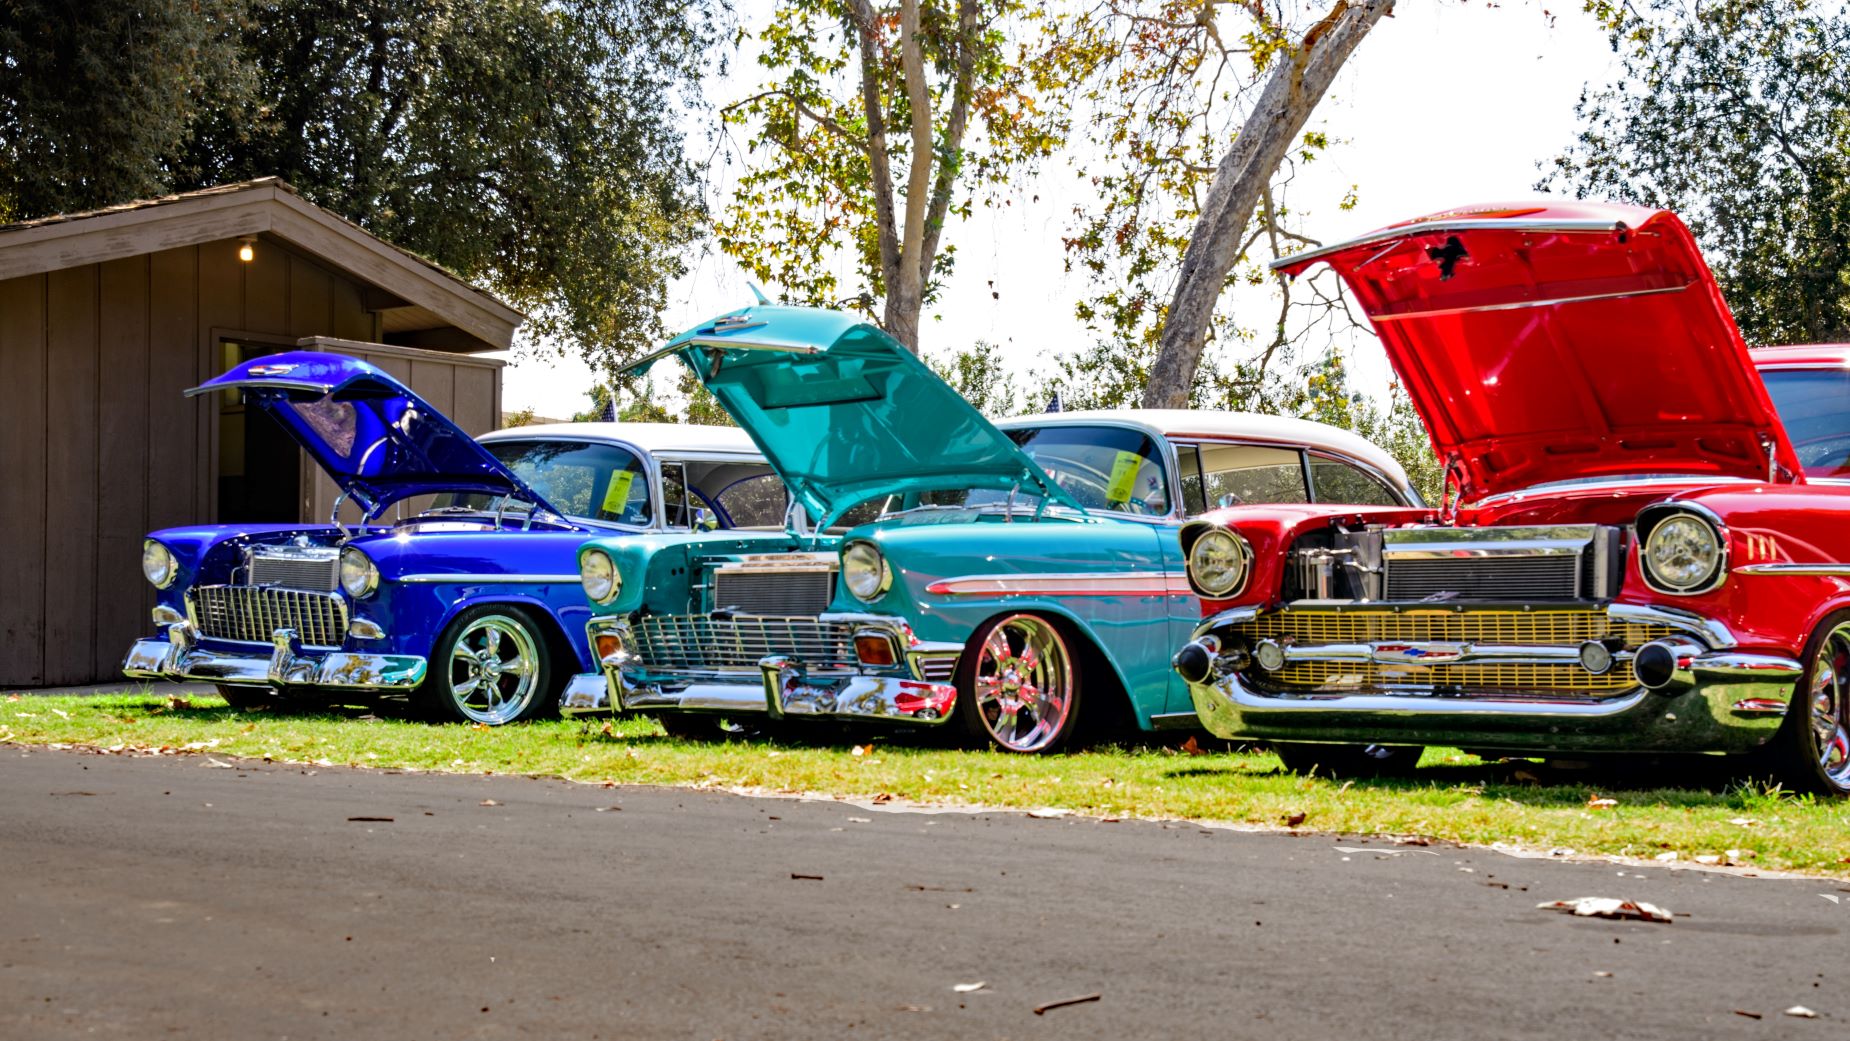 An image of three classic cars.